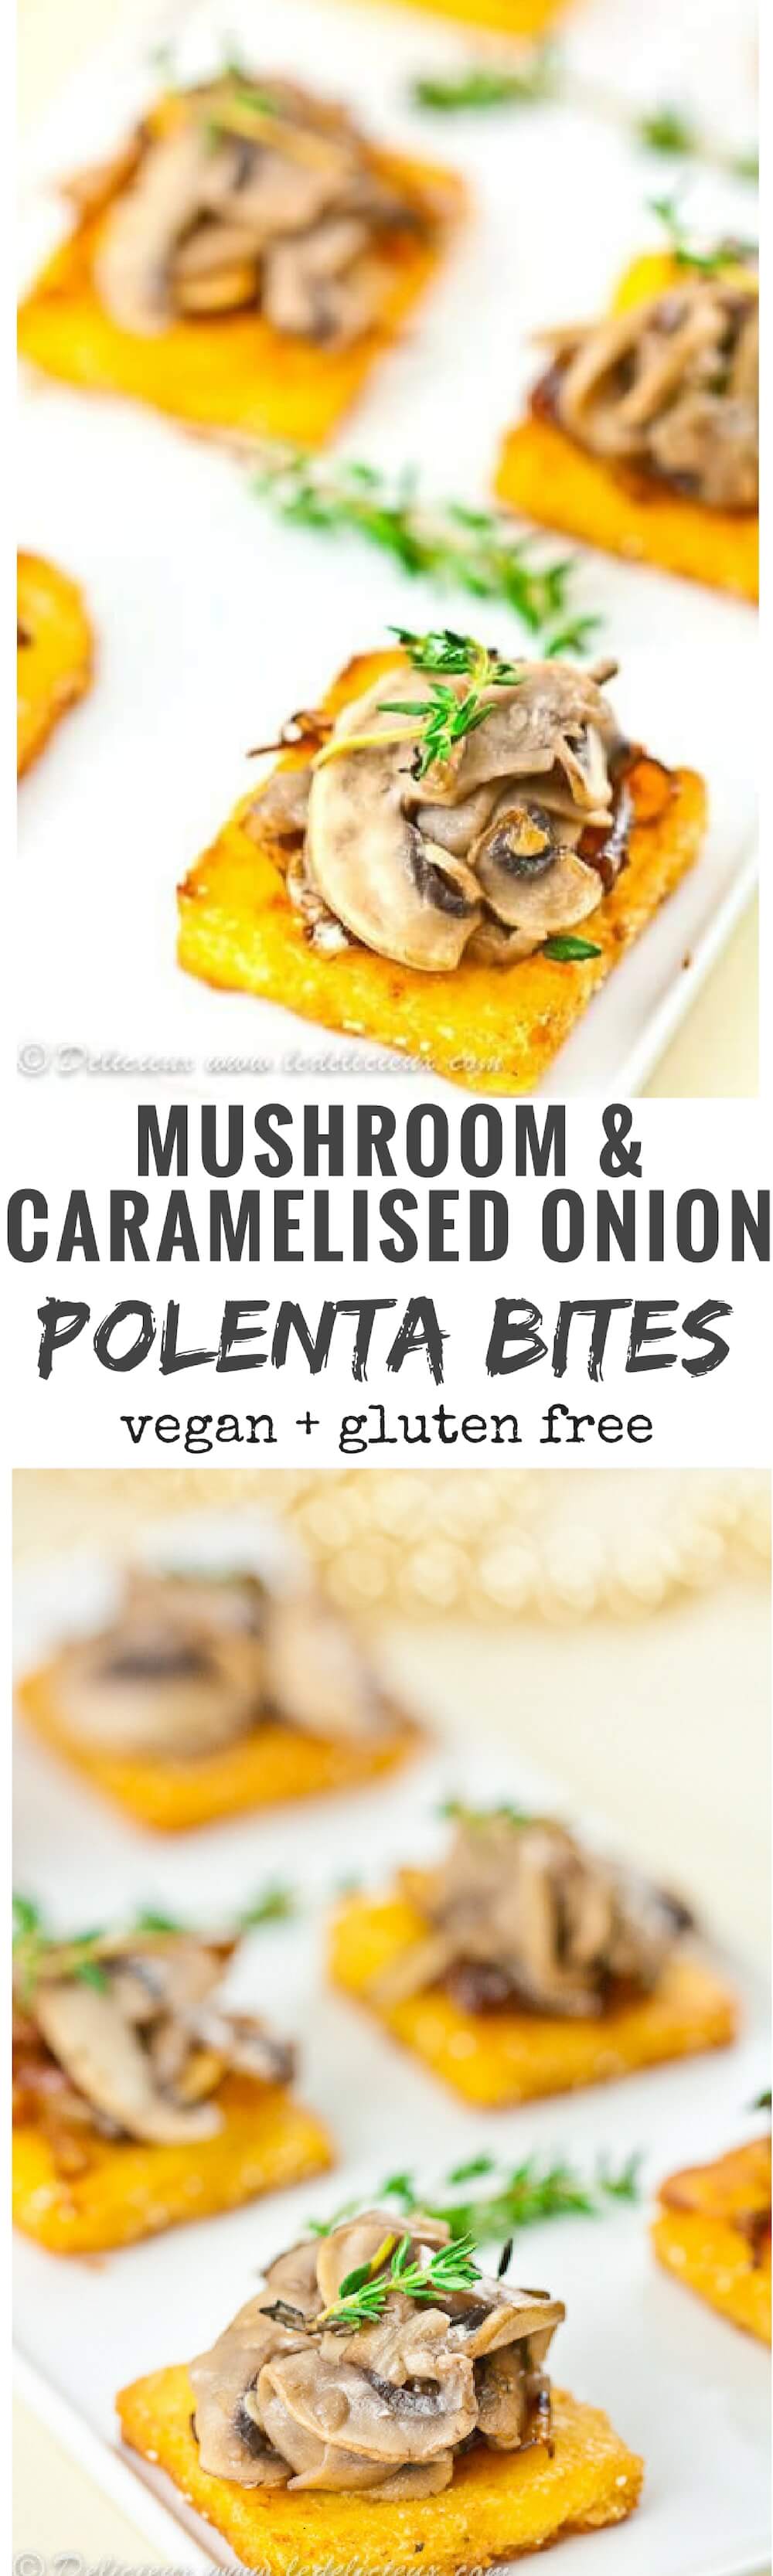 Looking for a fantastic make-ahead vegetarian canape for your next dinner party? Look not further than my Mushroom and Caramelised Onion Polenta Bites. Want to make them vegan? Swap the cheese for nutritional yeast for a fantastic vegan-friendly canape.